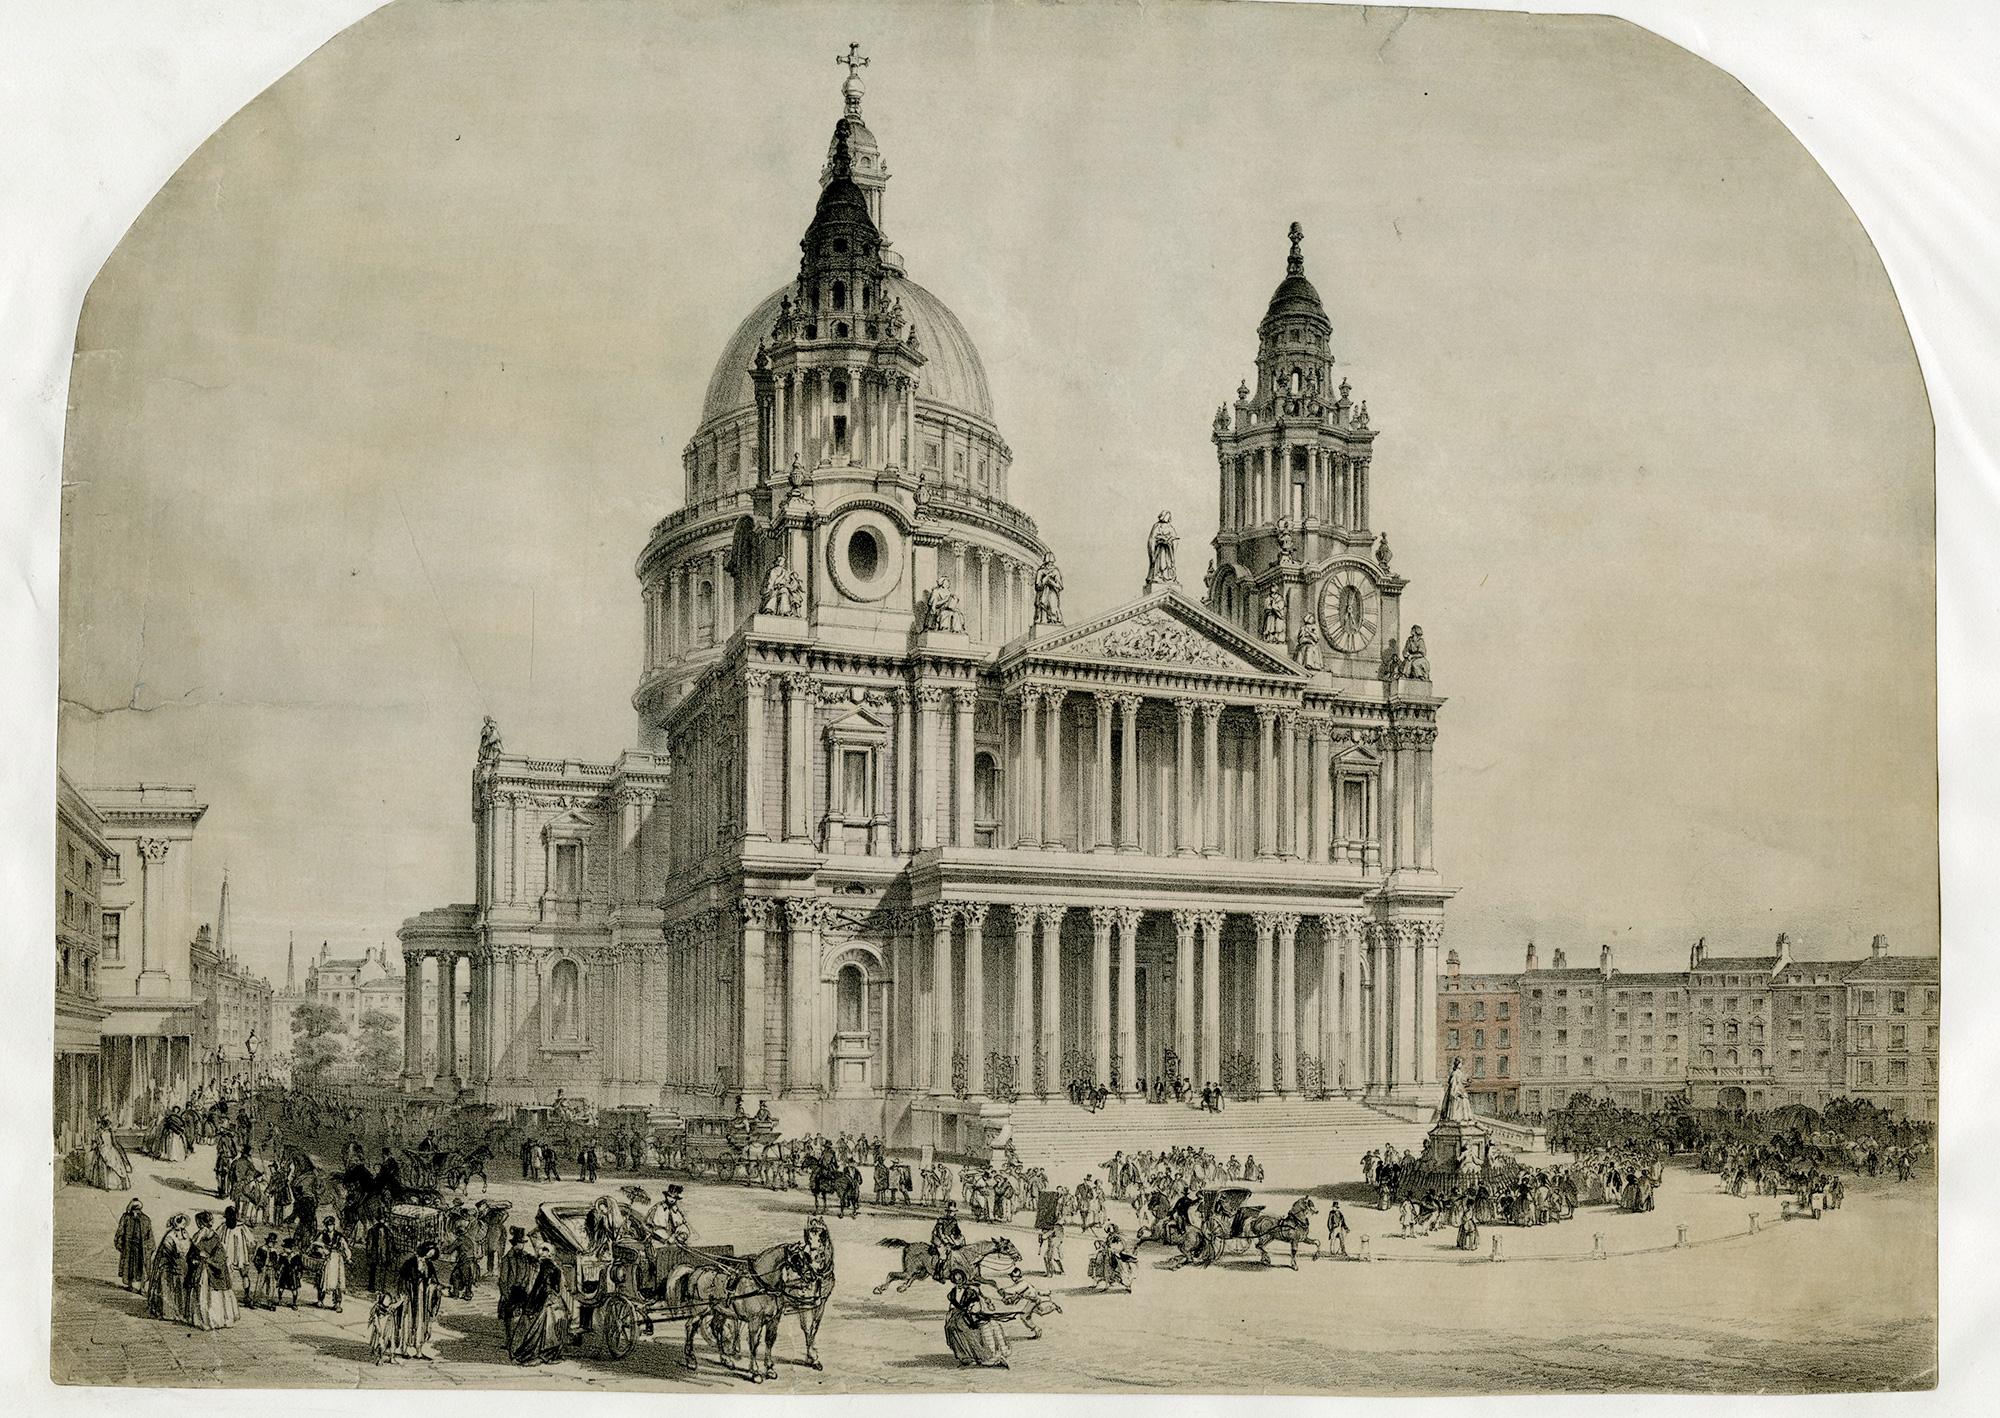 Unknown Interior Print - North View of St. Paul's Cathedral, London  English School, 19th century